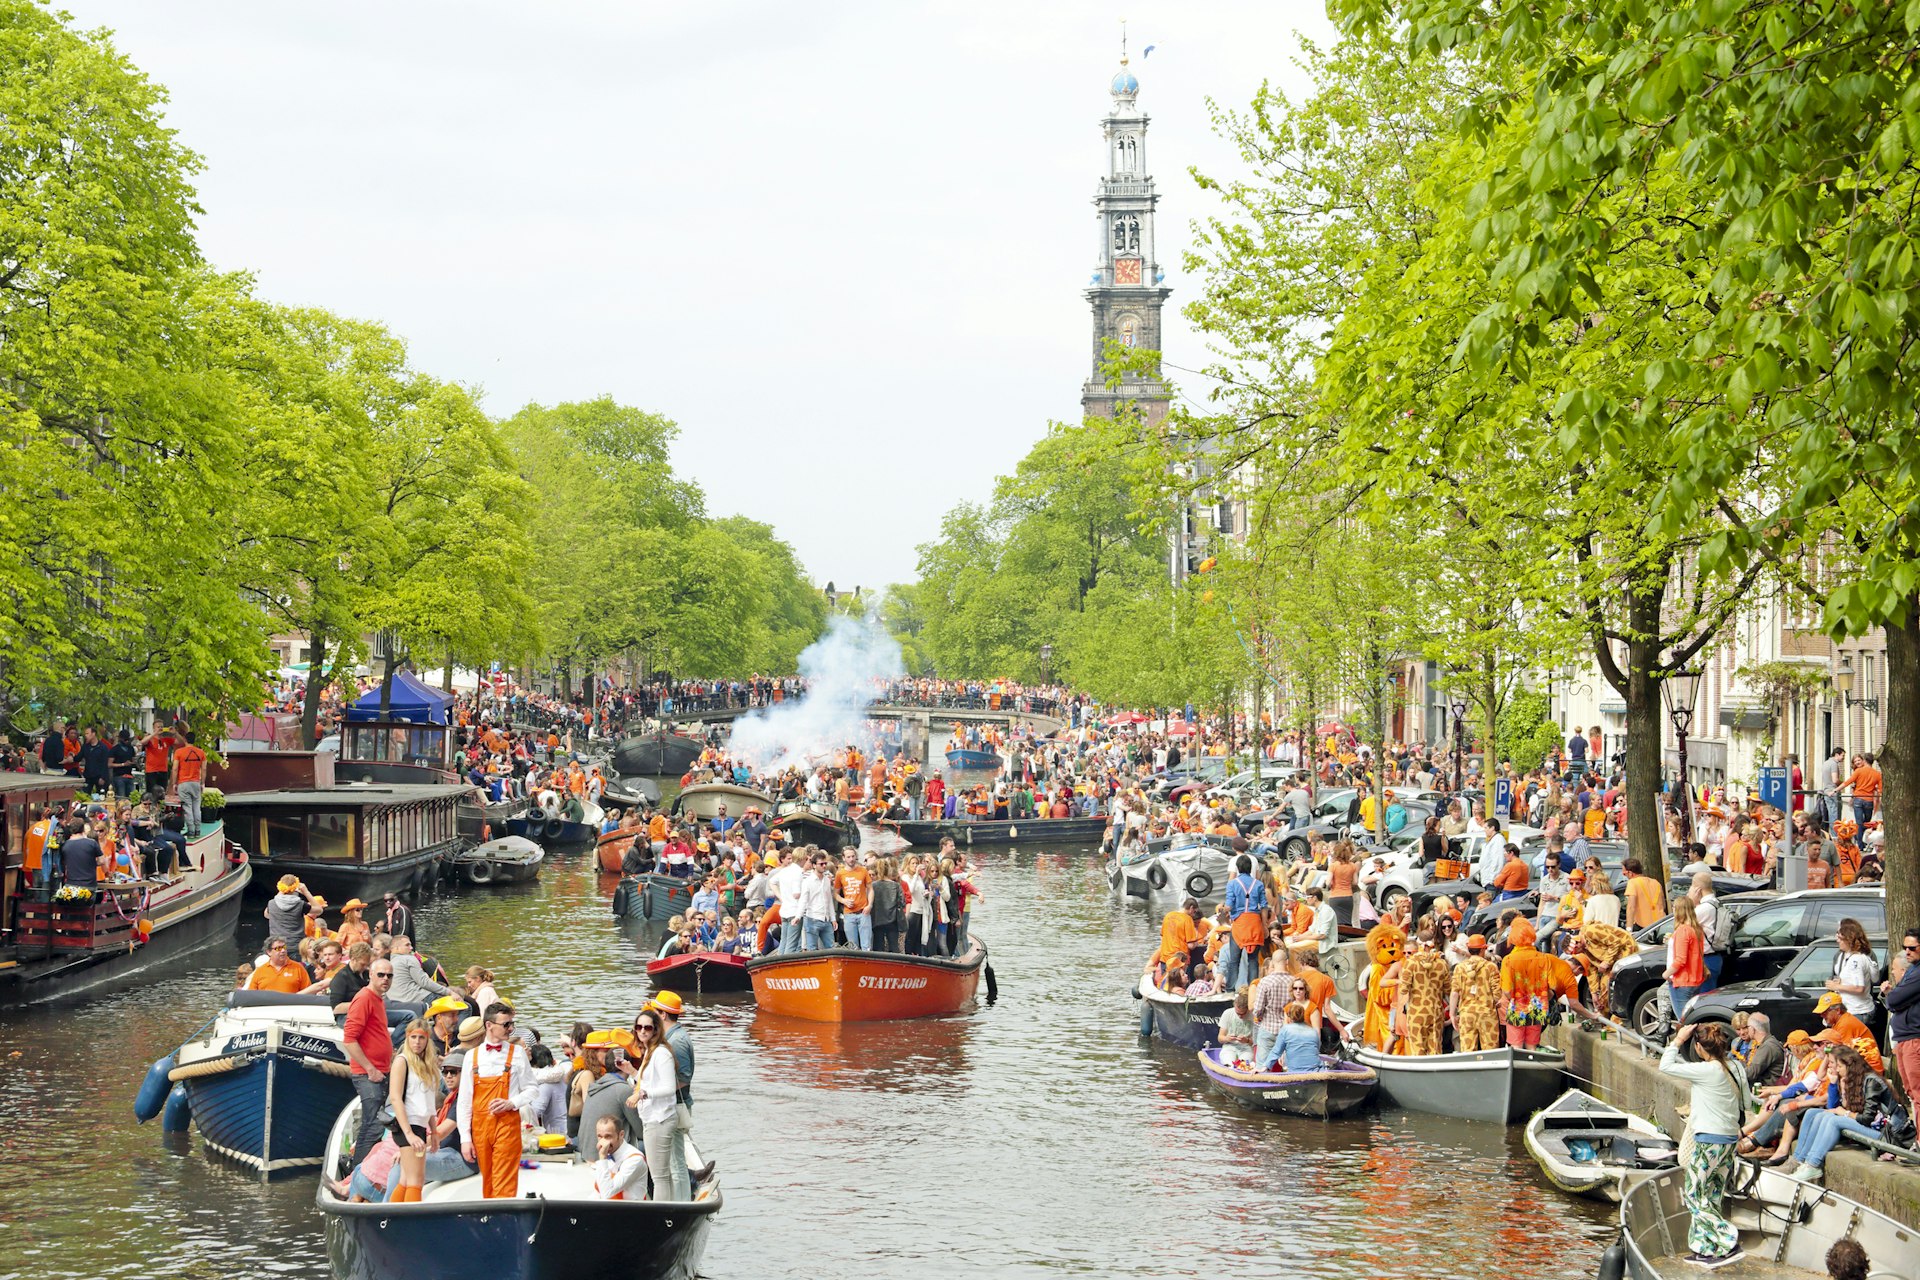 King's Day, Amsterdam canals filled with boats and people celebrating